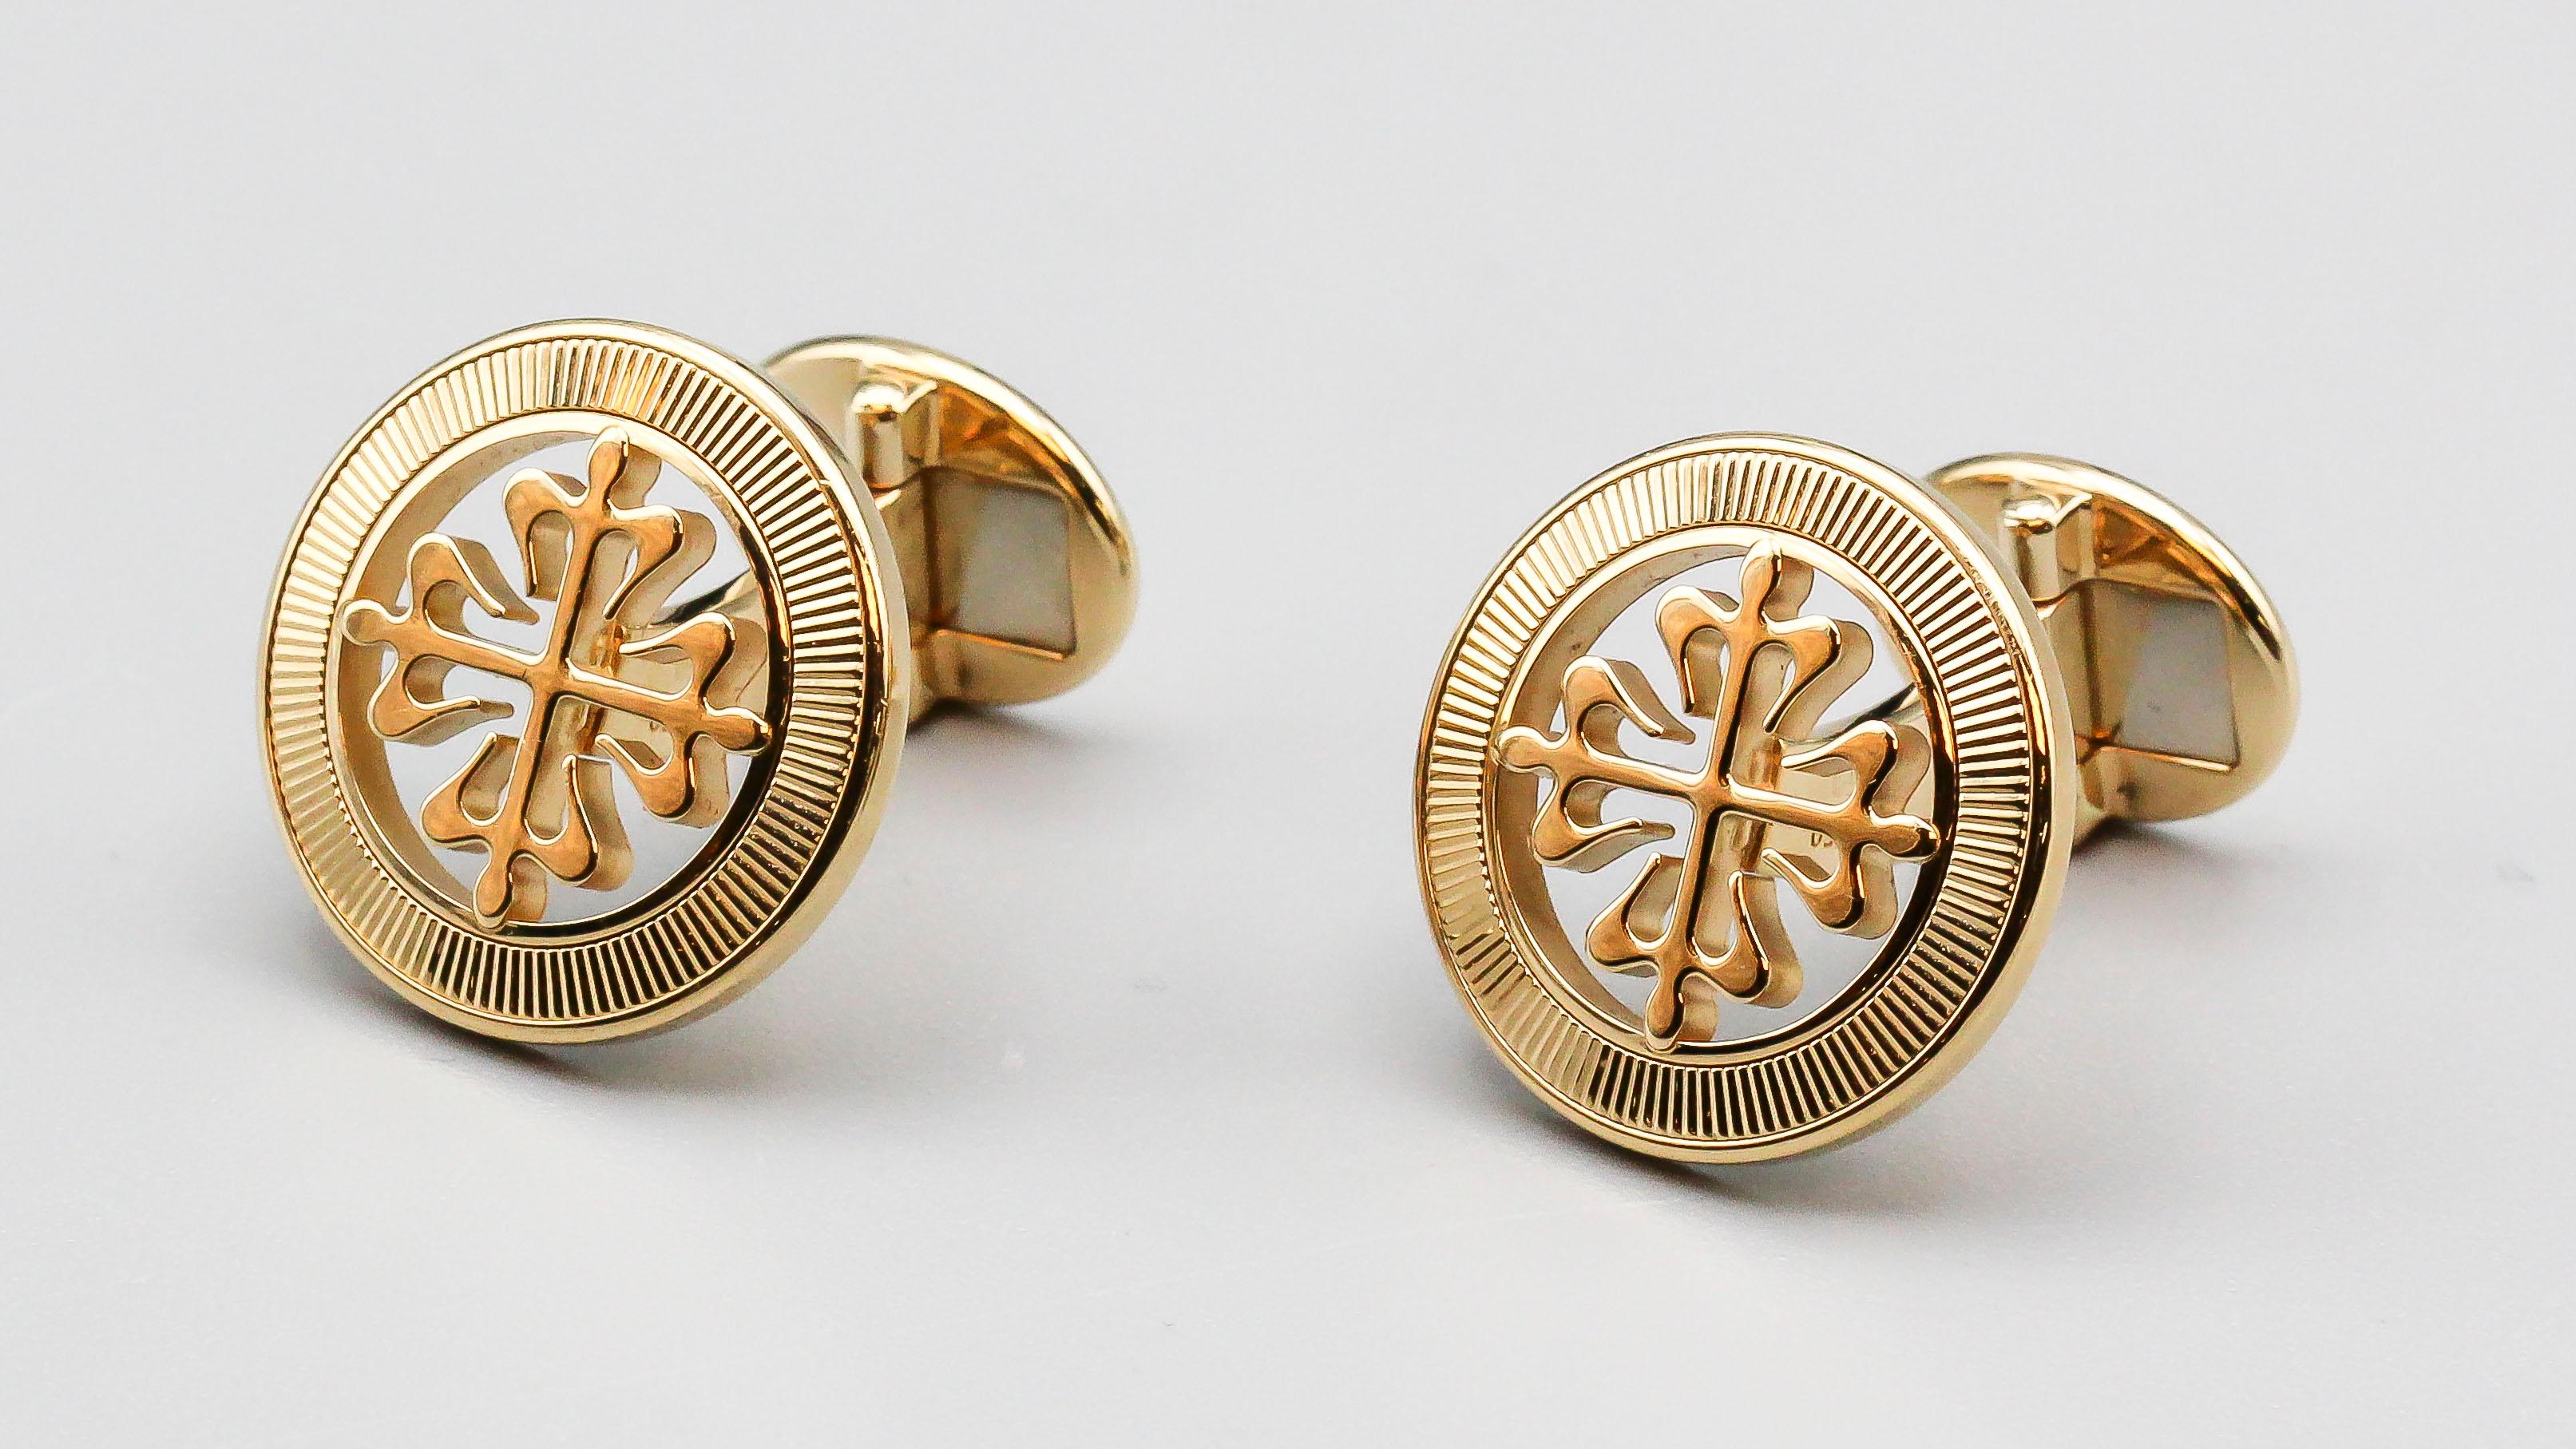 Fine pair of 18K yellow gold cross cufflinks, from the 